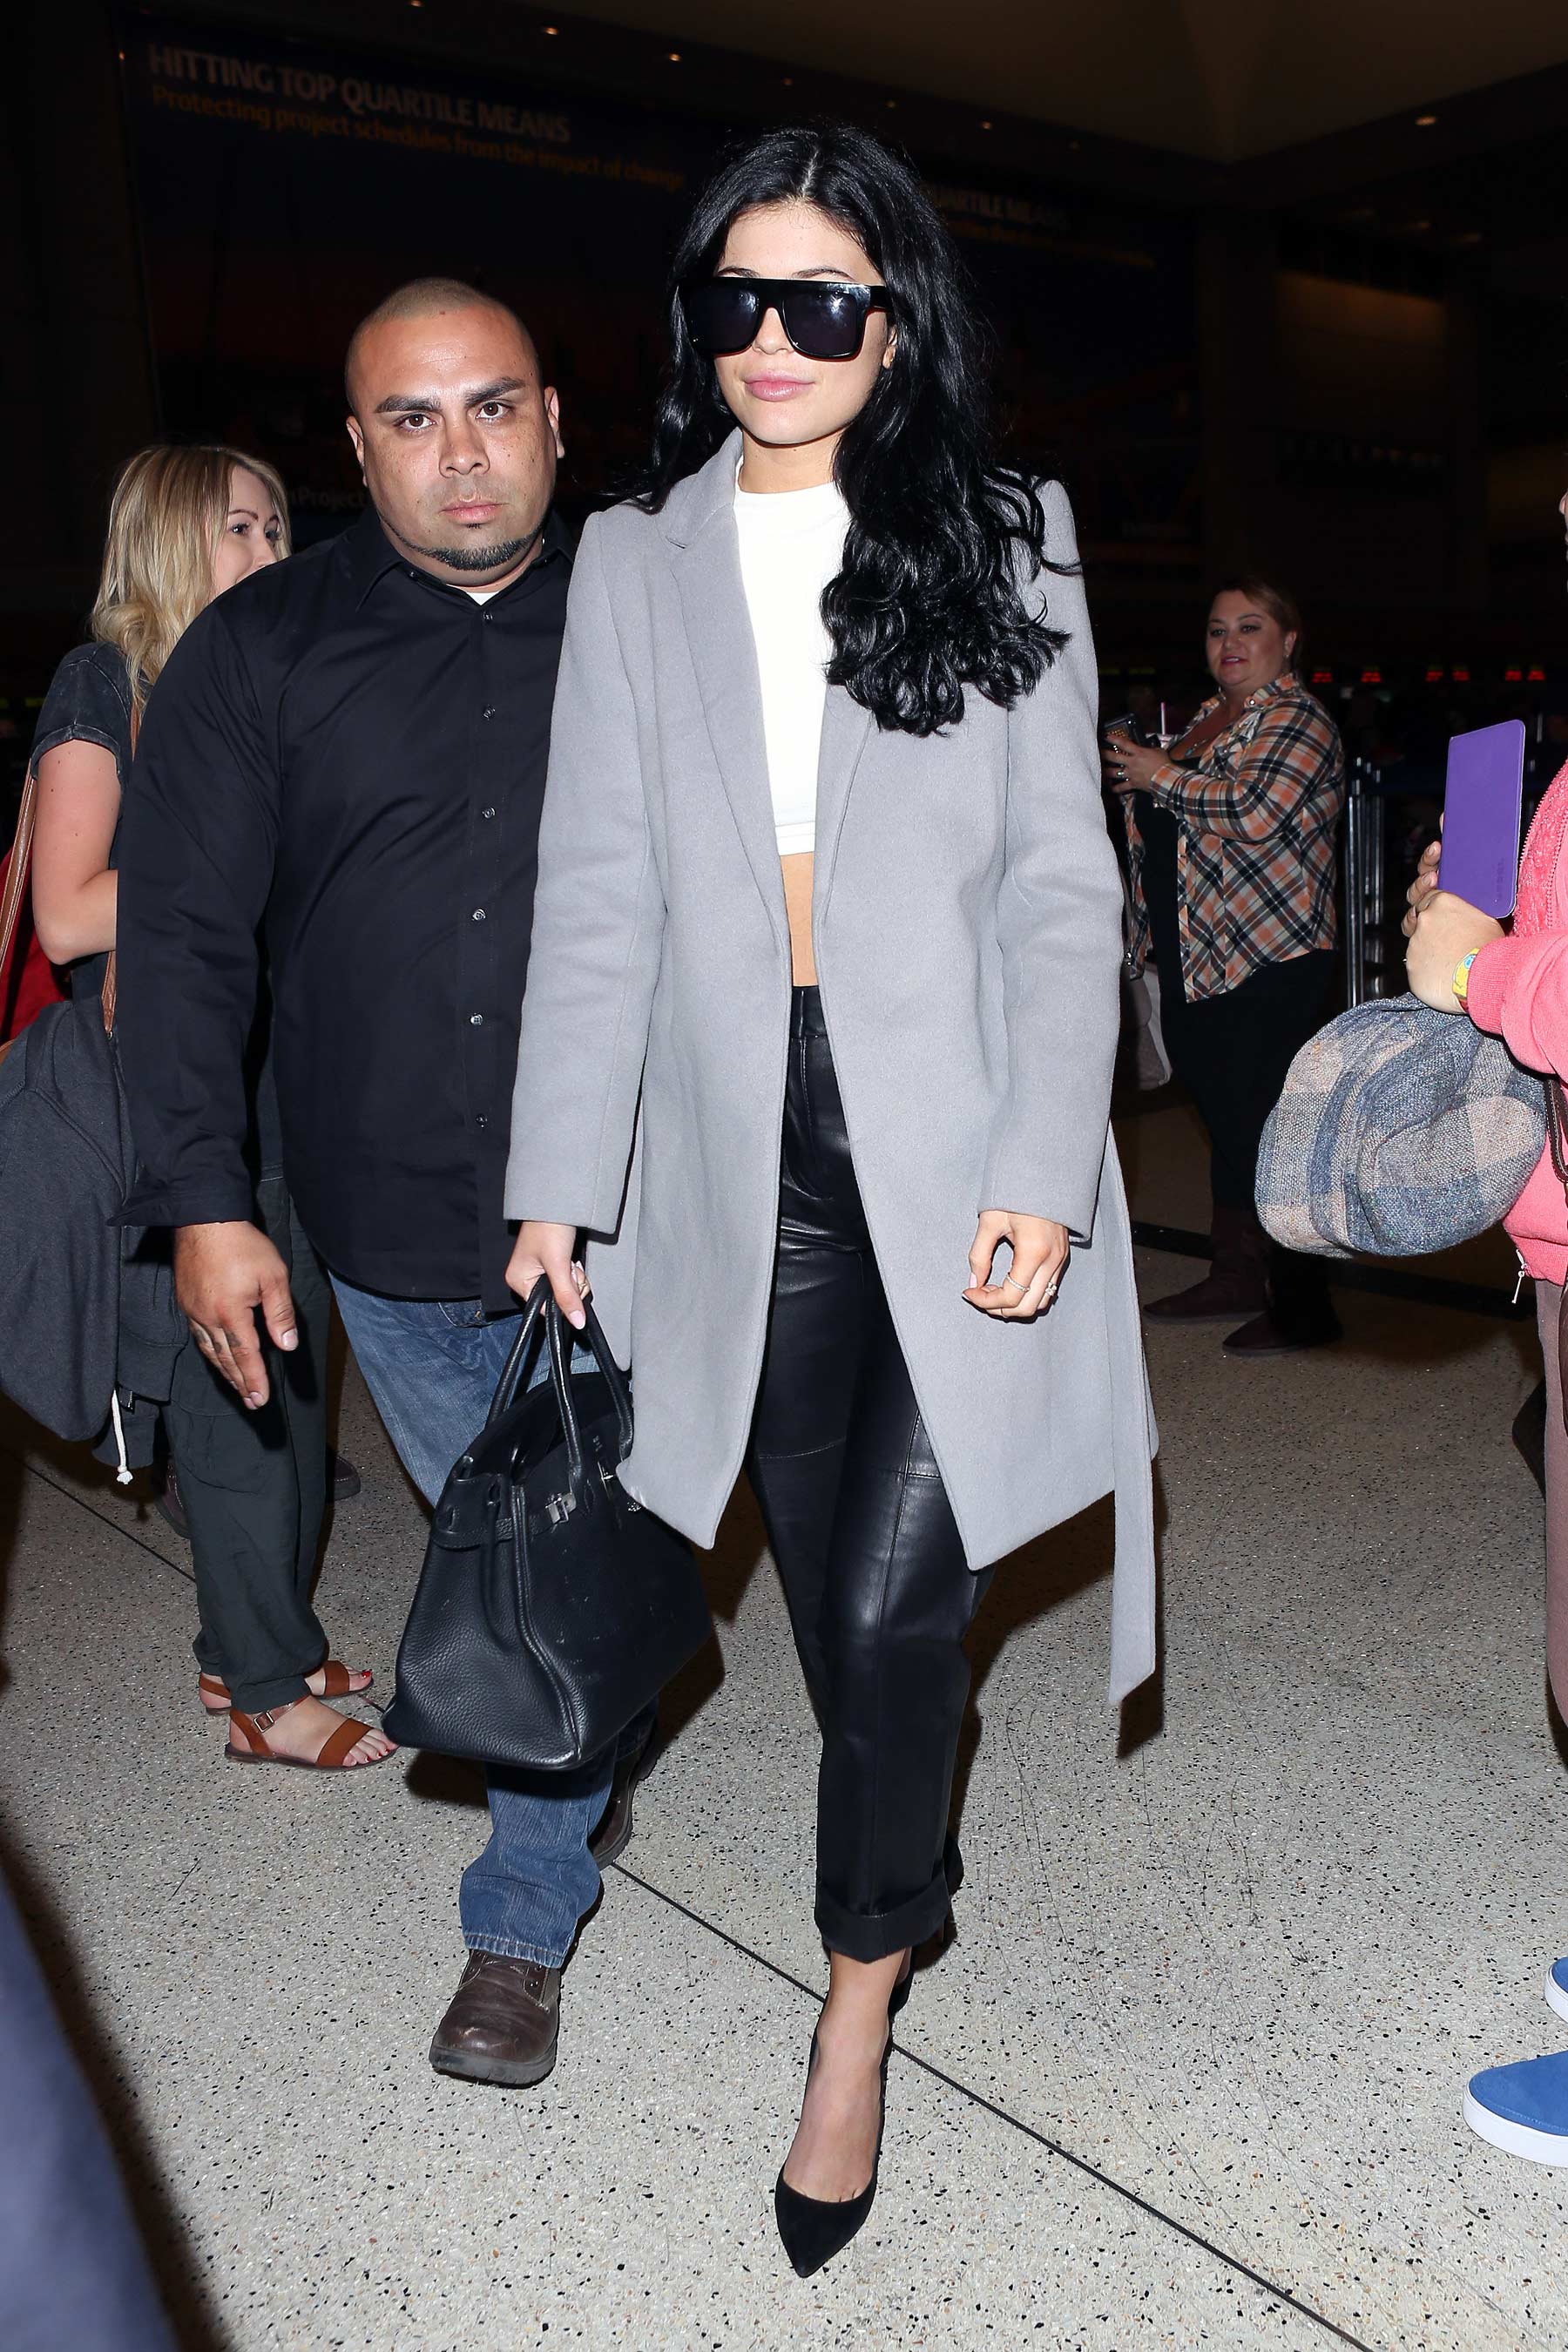 Kylie Jenner at LAX